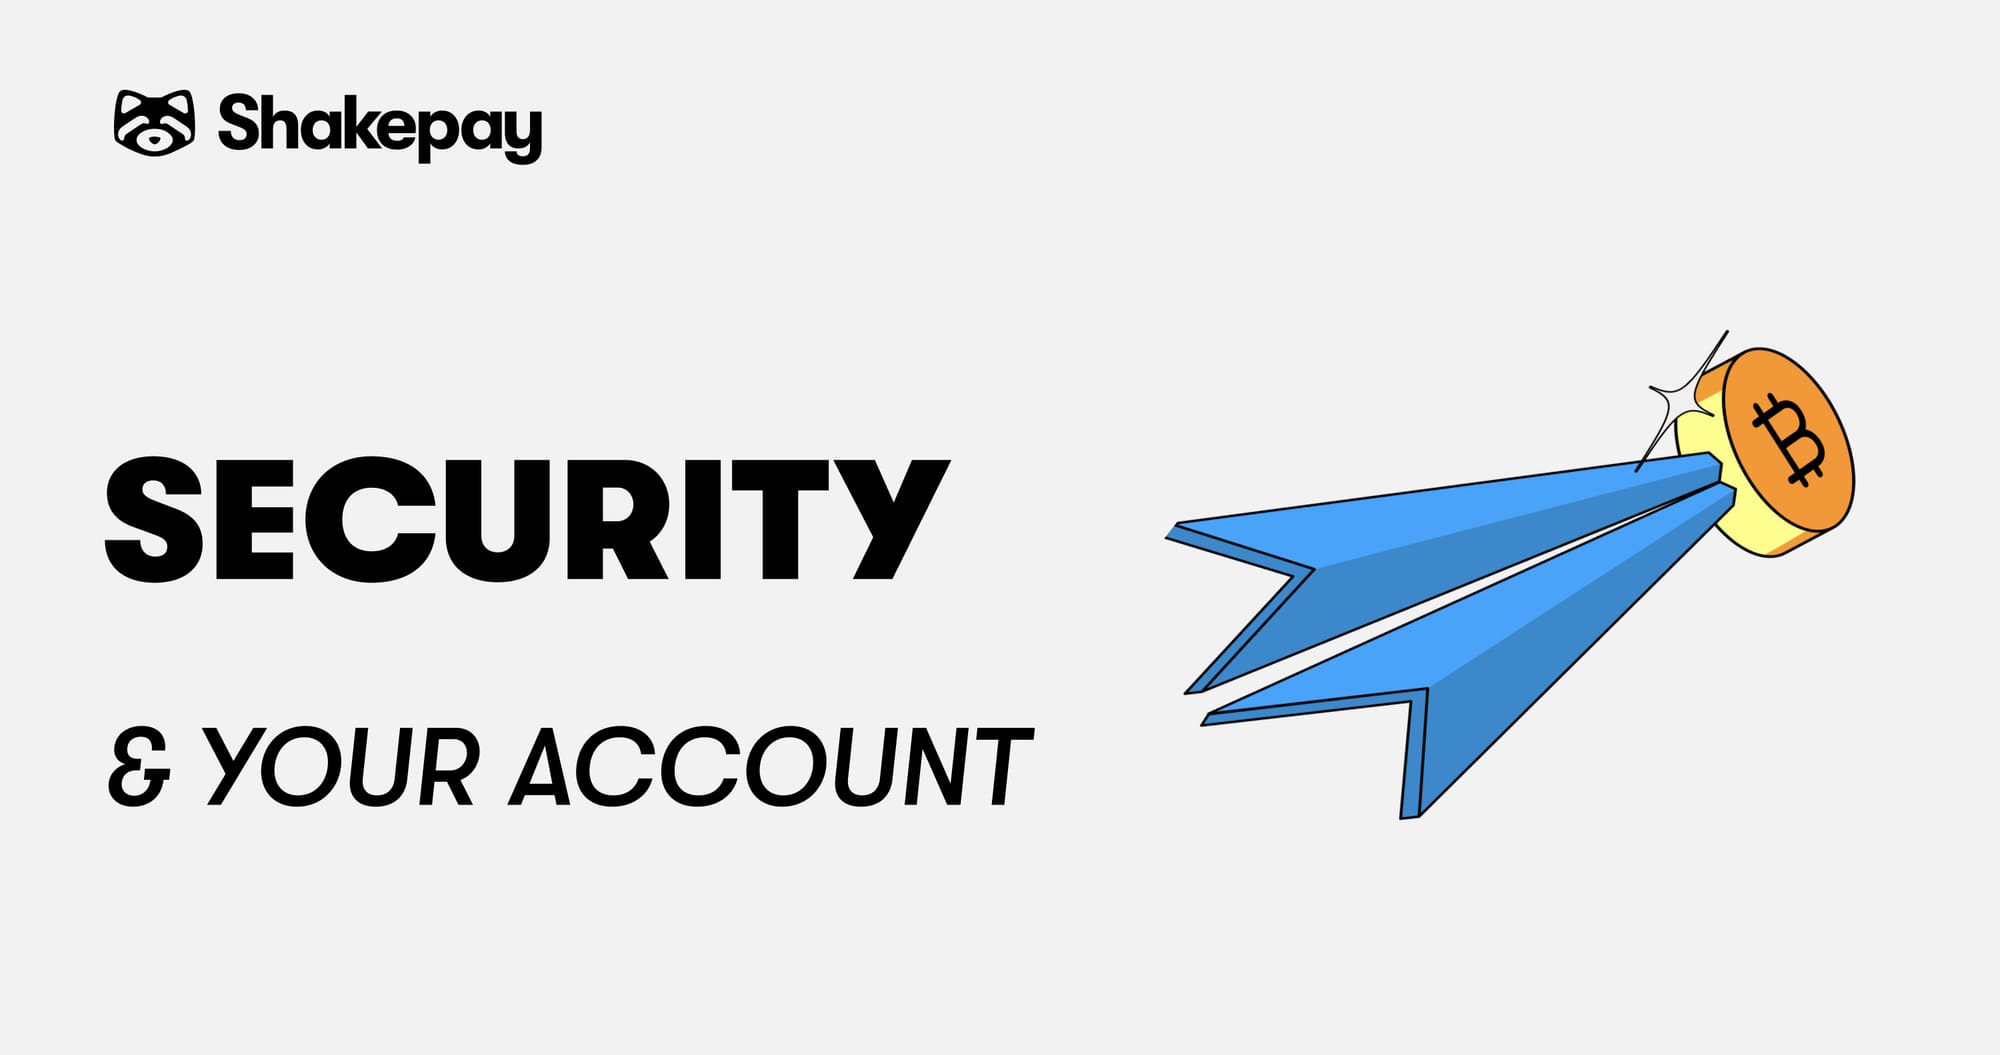 How to best secure your Shakepay account